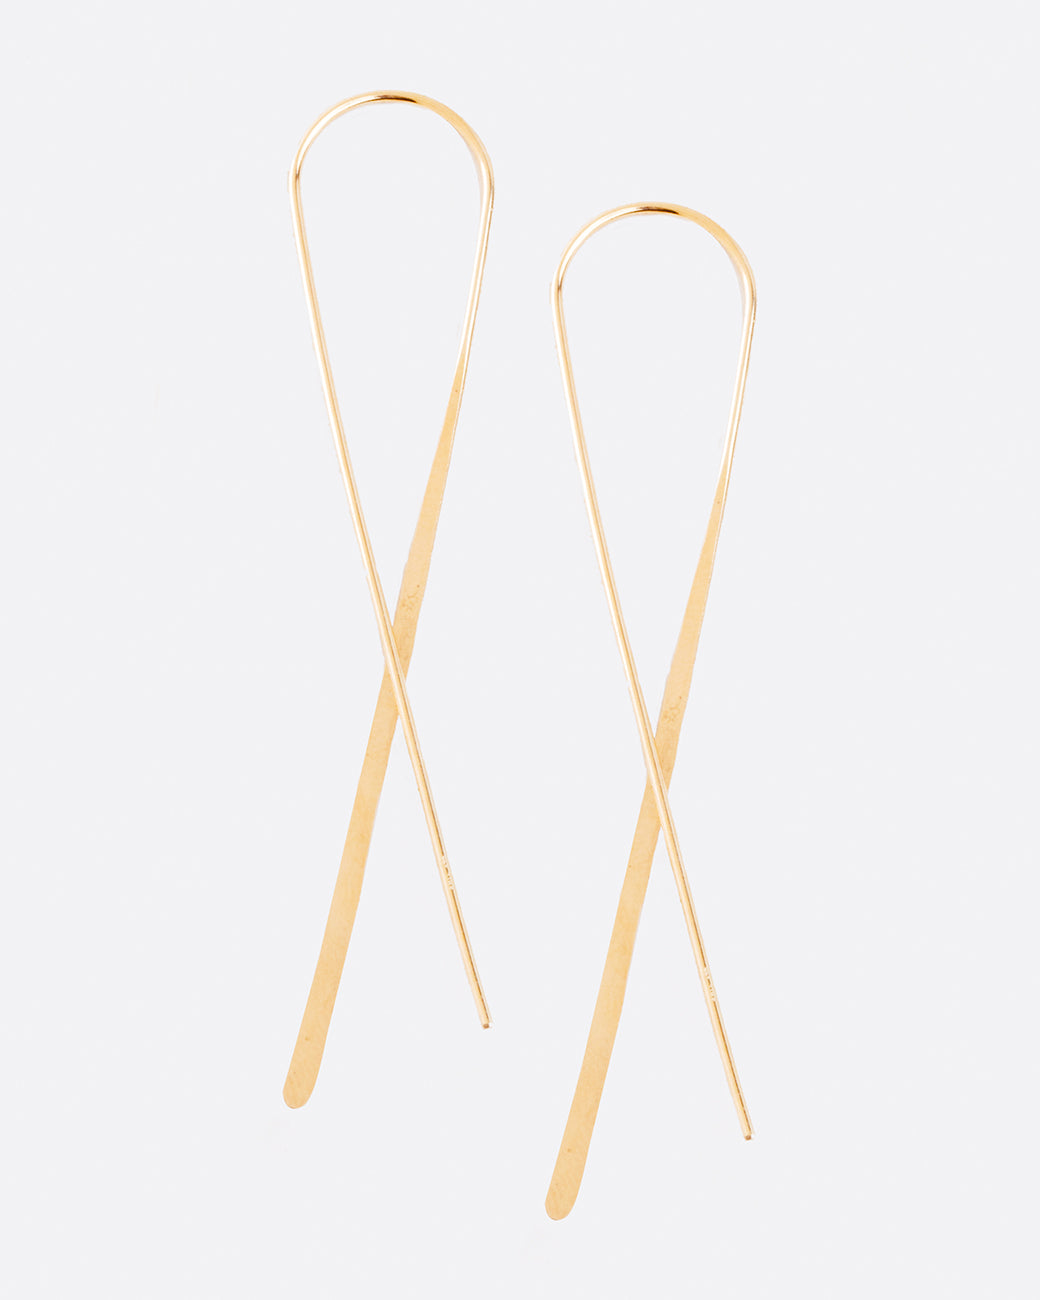 Fairmined gold, hand-hammered, large rounded hook earrings.